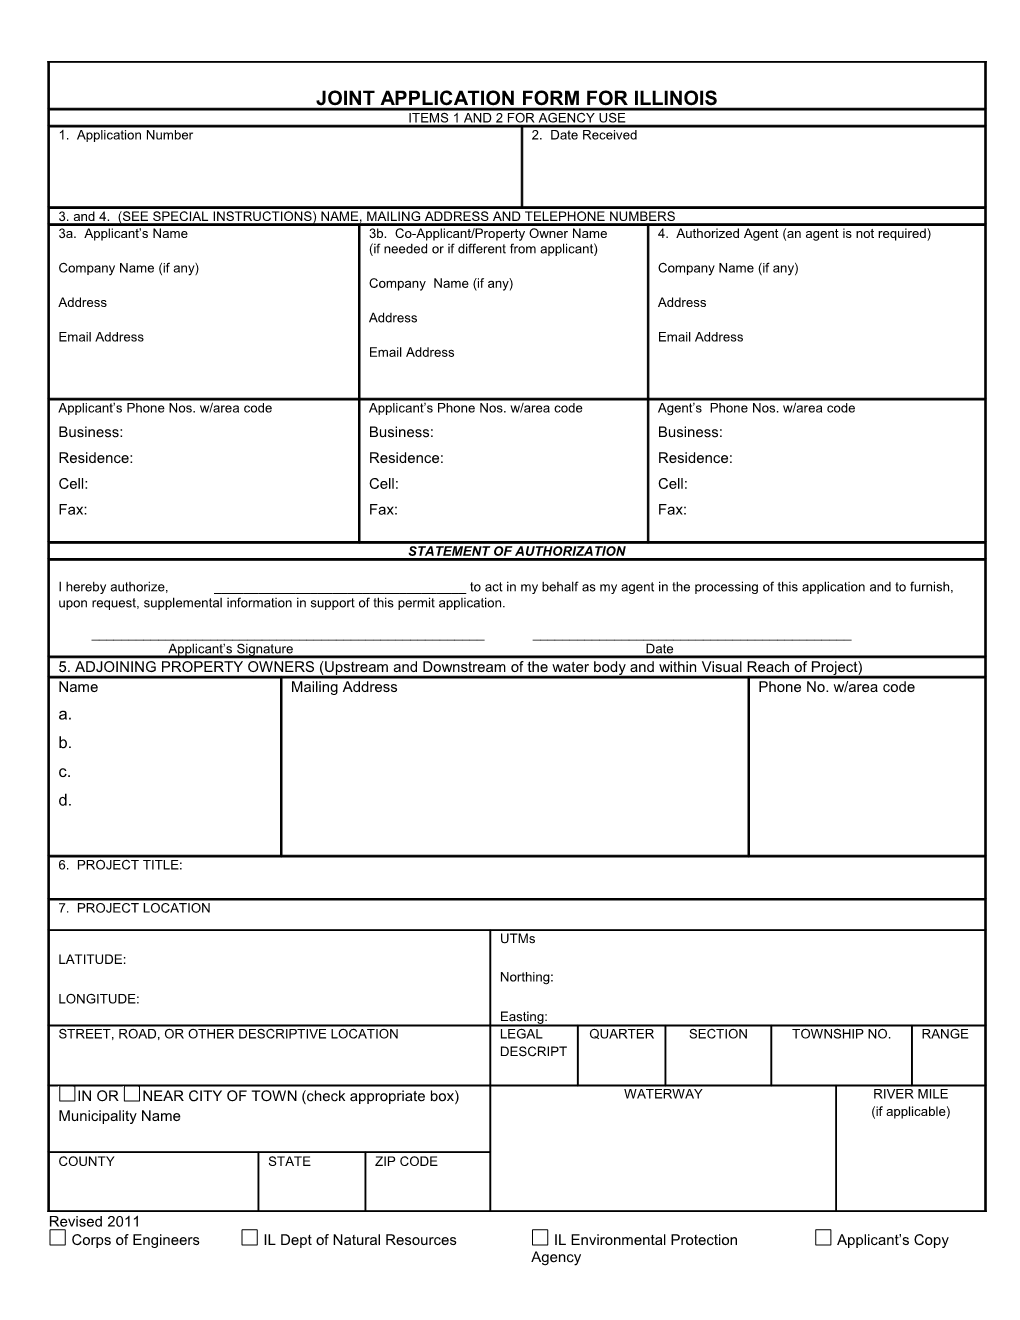 Joint Application Form s1